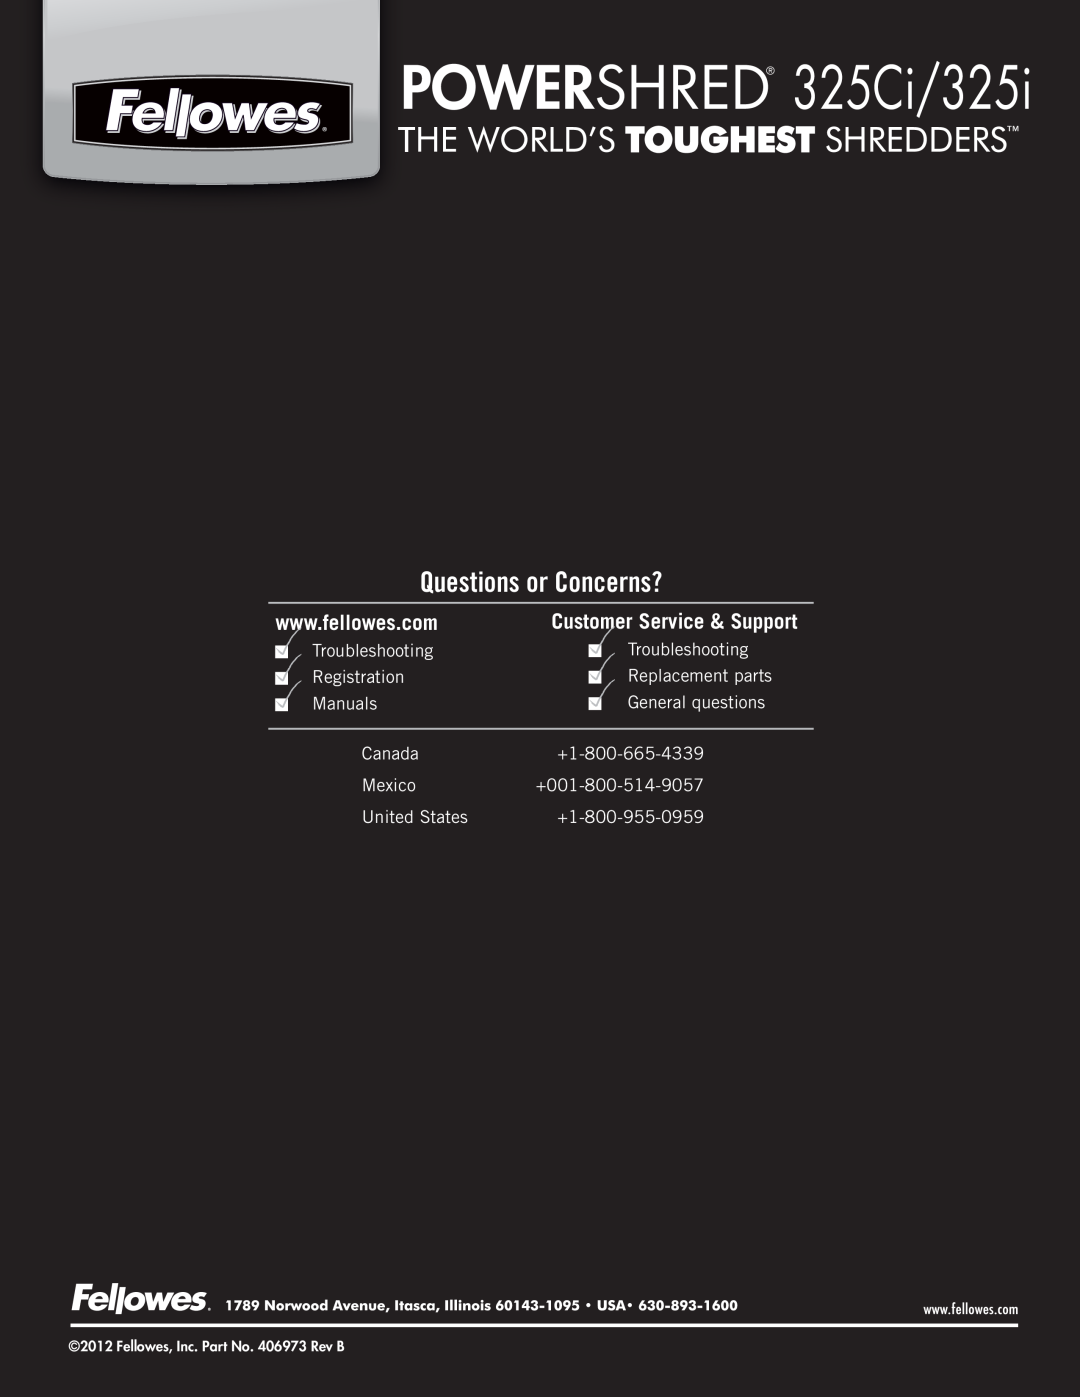 Fellowes manual Questions or Concerns?, Customer Service & Support, POWERSHRED 325Ci/325i 